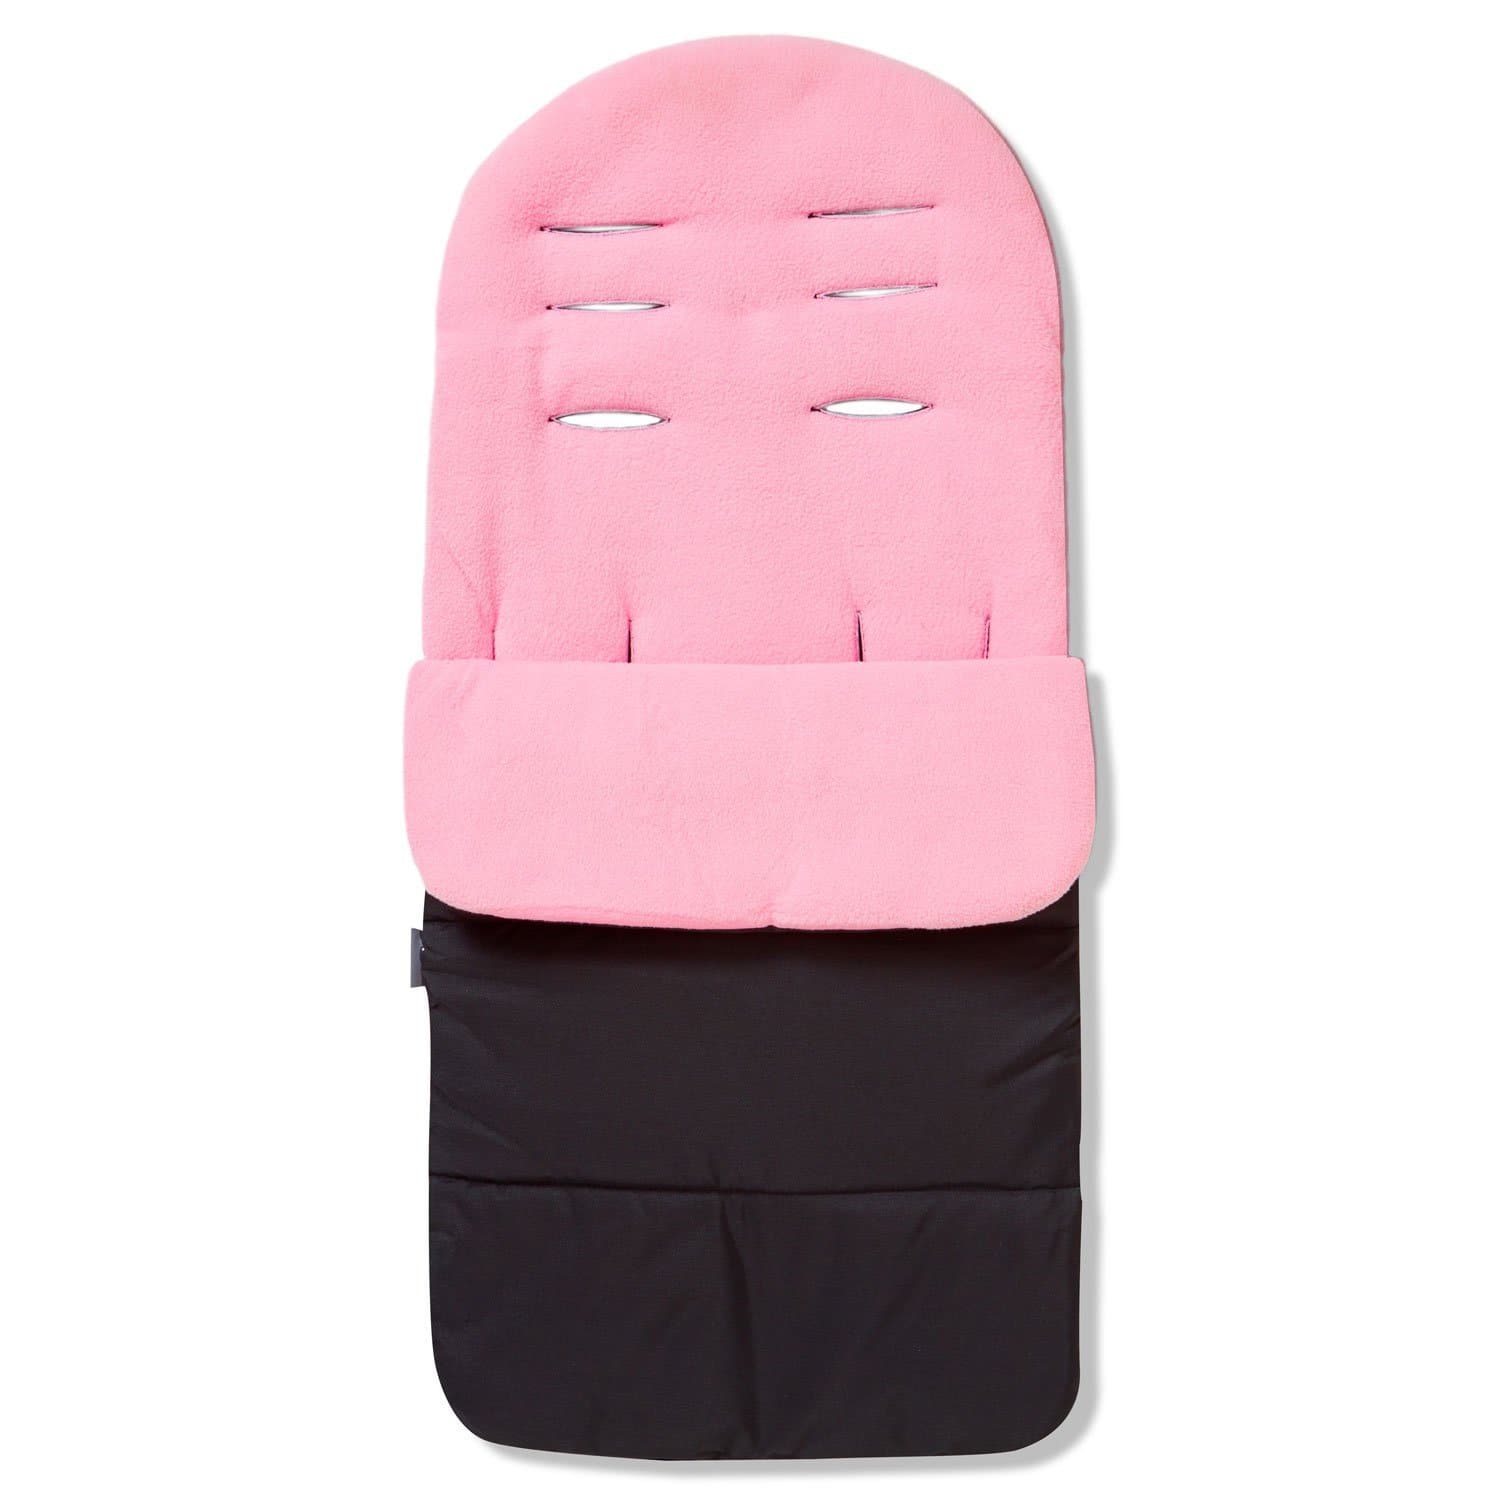 Premium Footmuff / Cosy Toes Compatible with Baby Weavers - Candy Pink / Fits All Models | For Your Little One